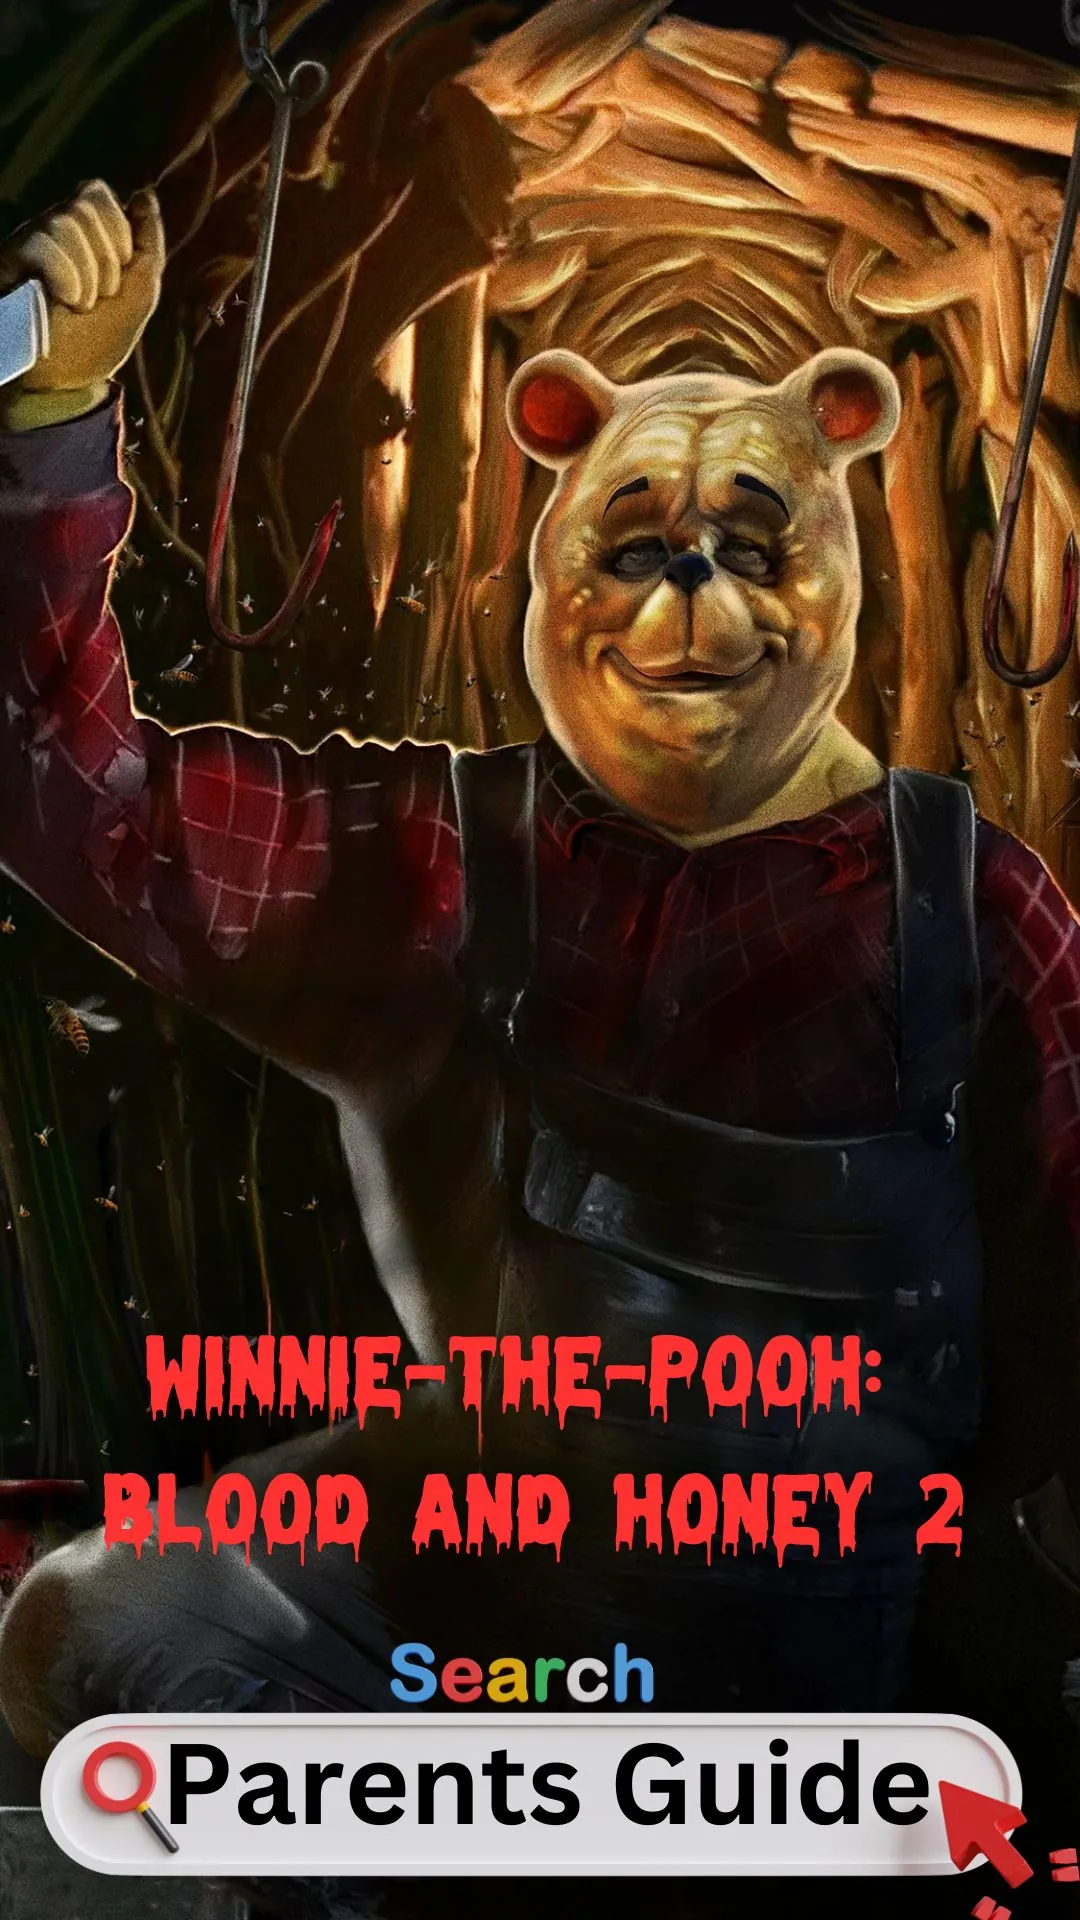 Winnie-the-Poo Parents Guide (1)